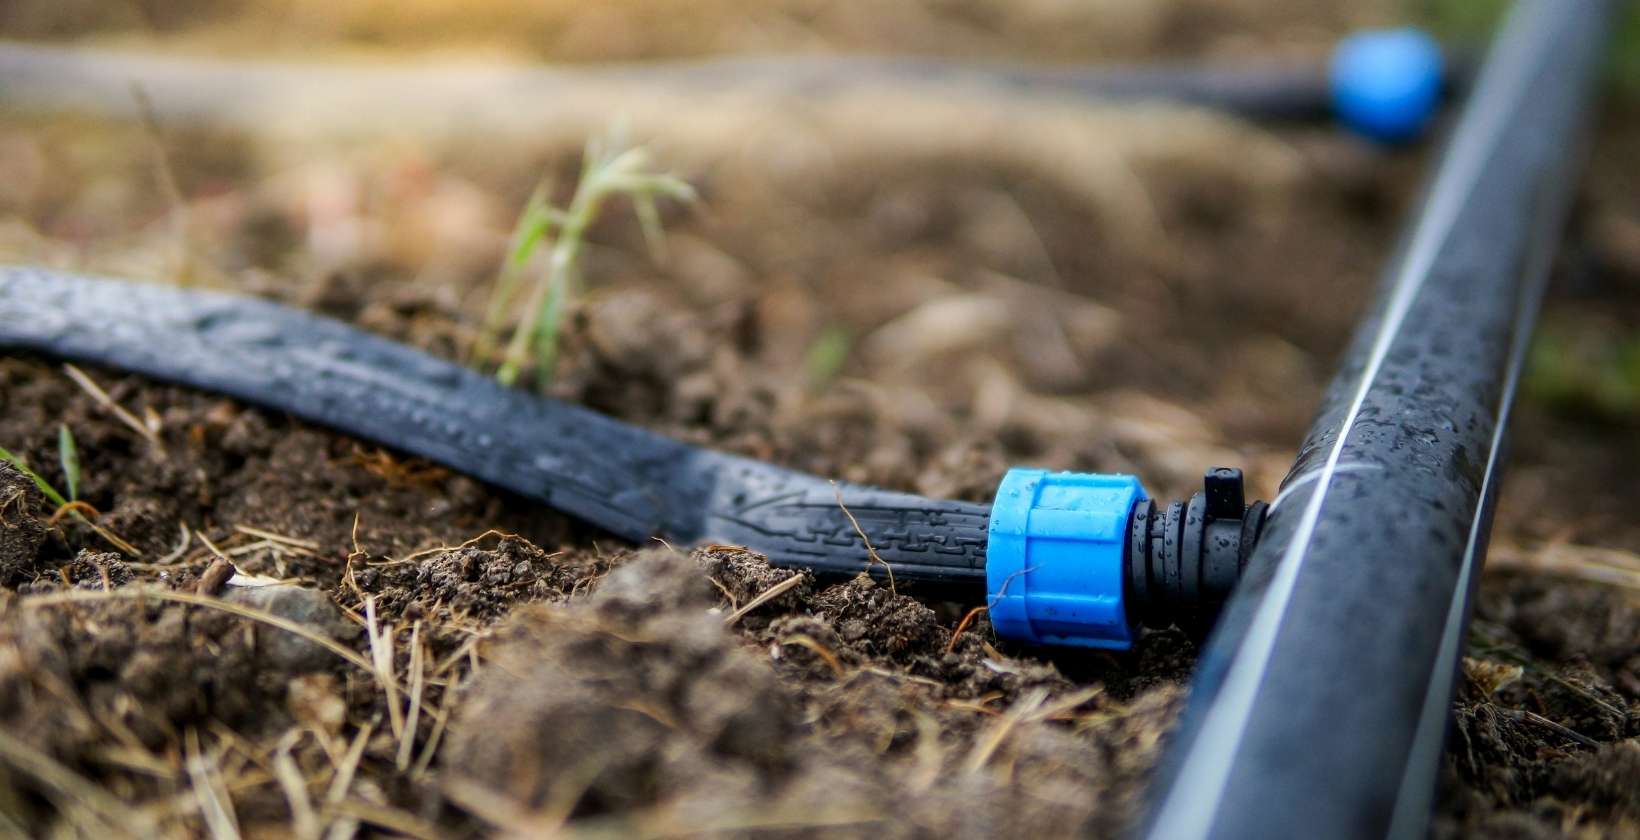 How To Connect Drip Irrigation Hose?